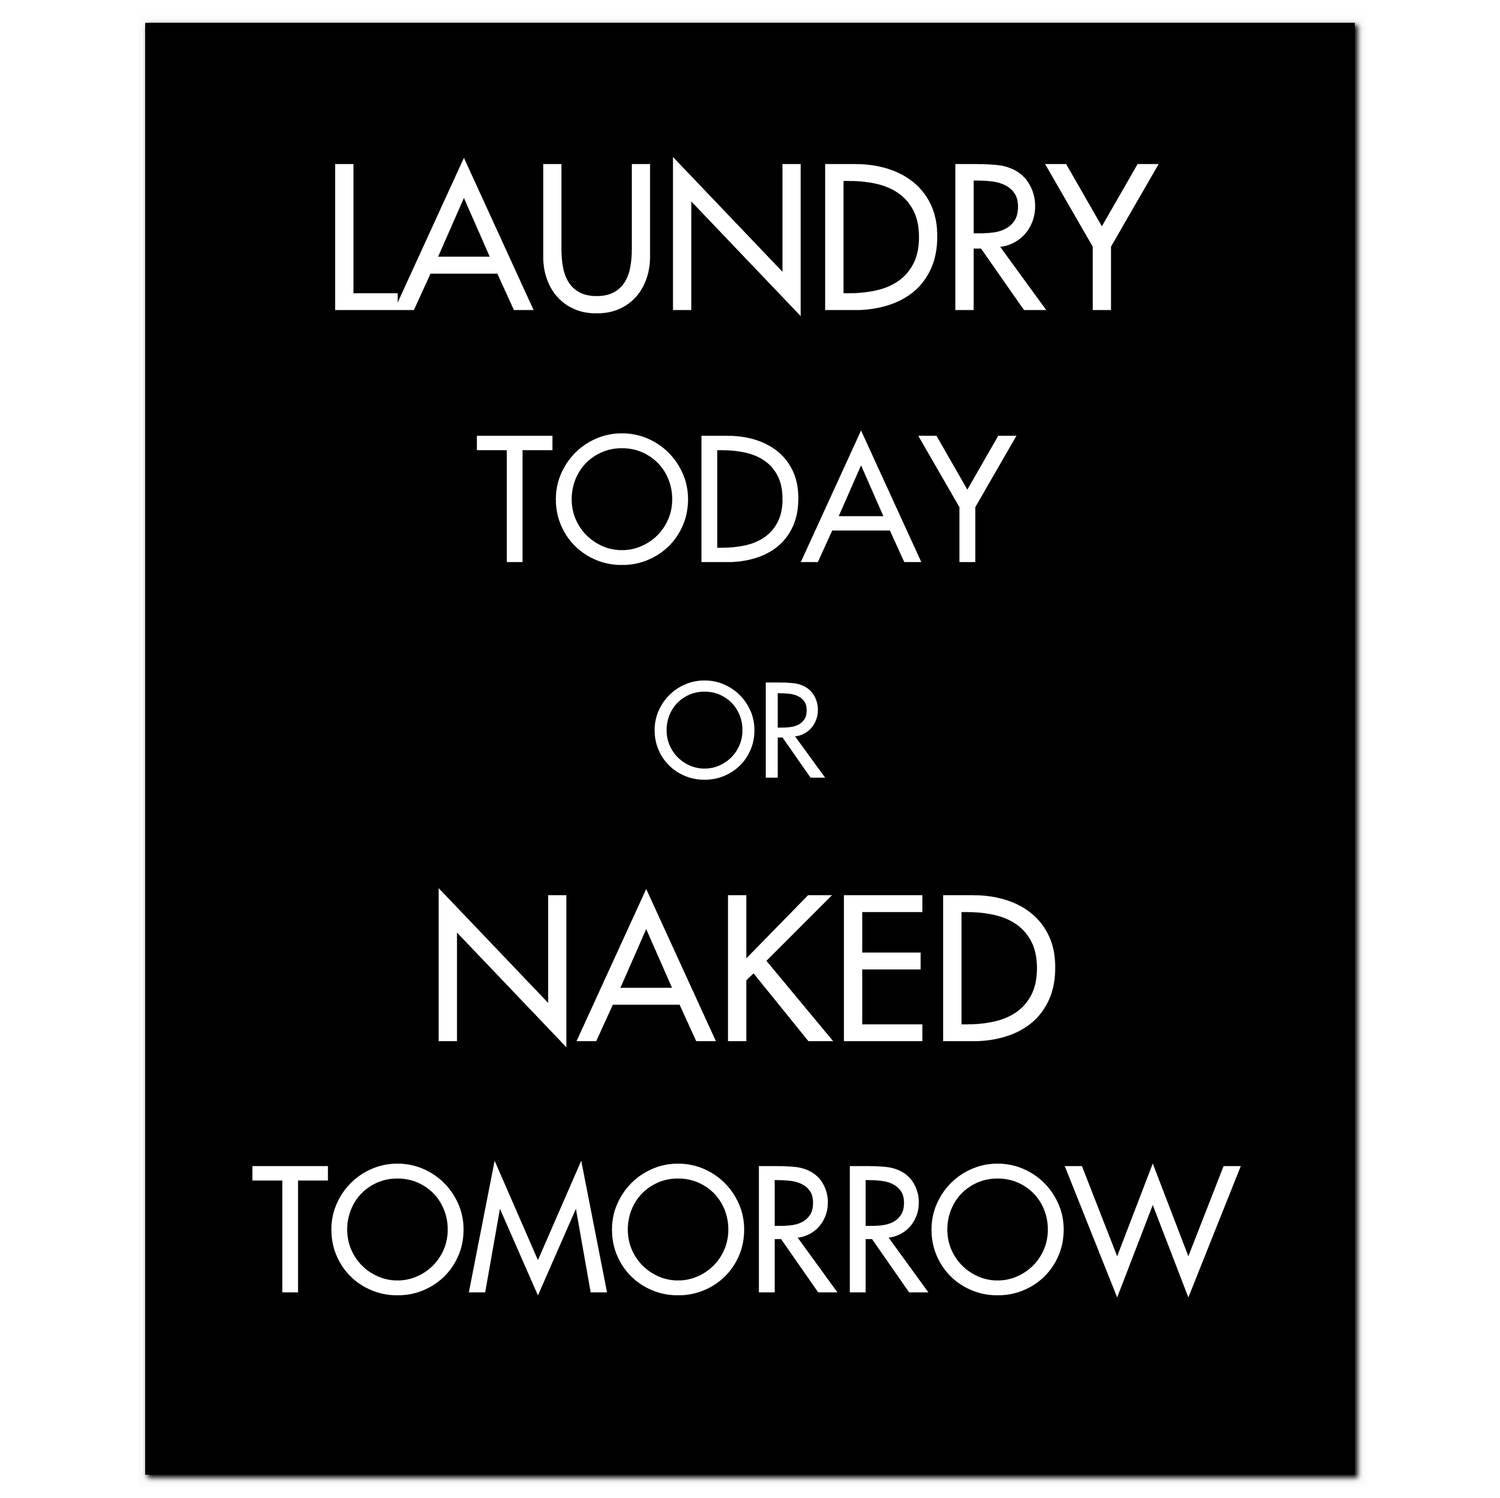 View Laundry Today Or Naked Tomorrow Silver Foil Plaque information